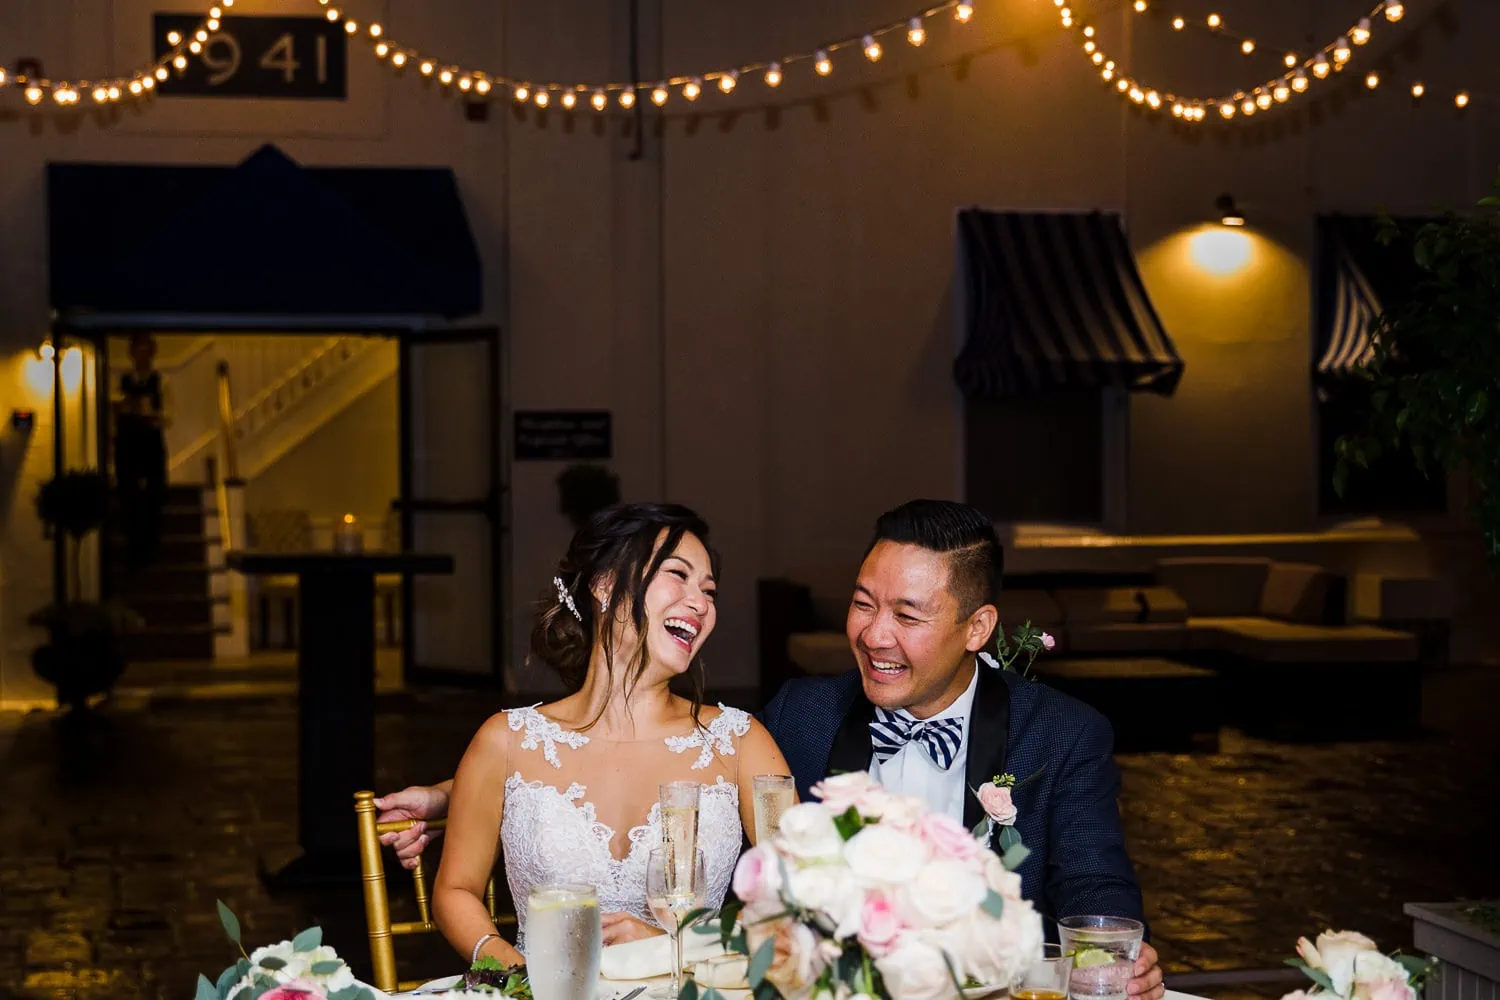 A bride and groom laughing at a sweetheart table with string lights above them